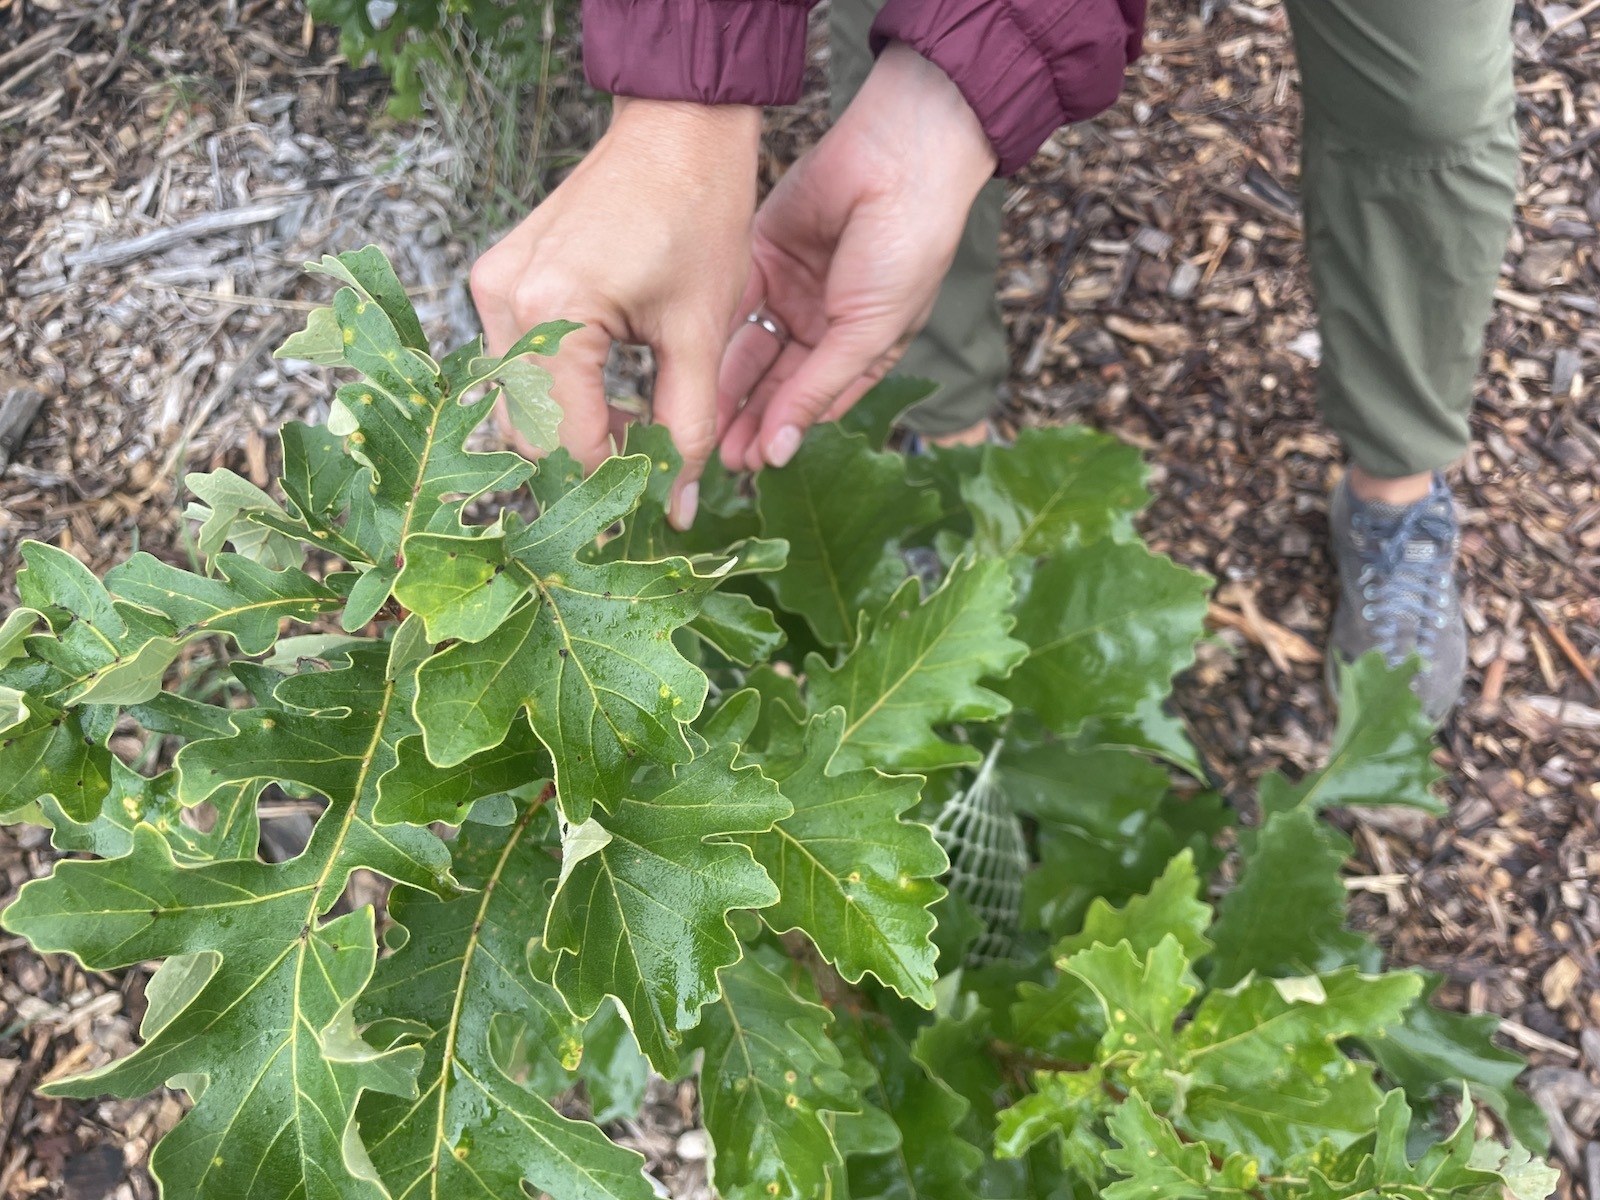 Two human hands touch a cluster of bur oak leaves.